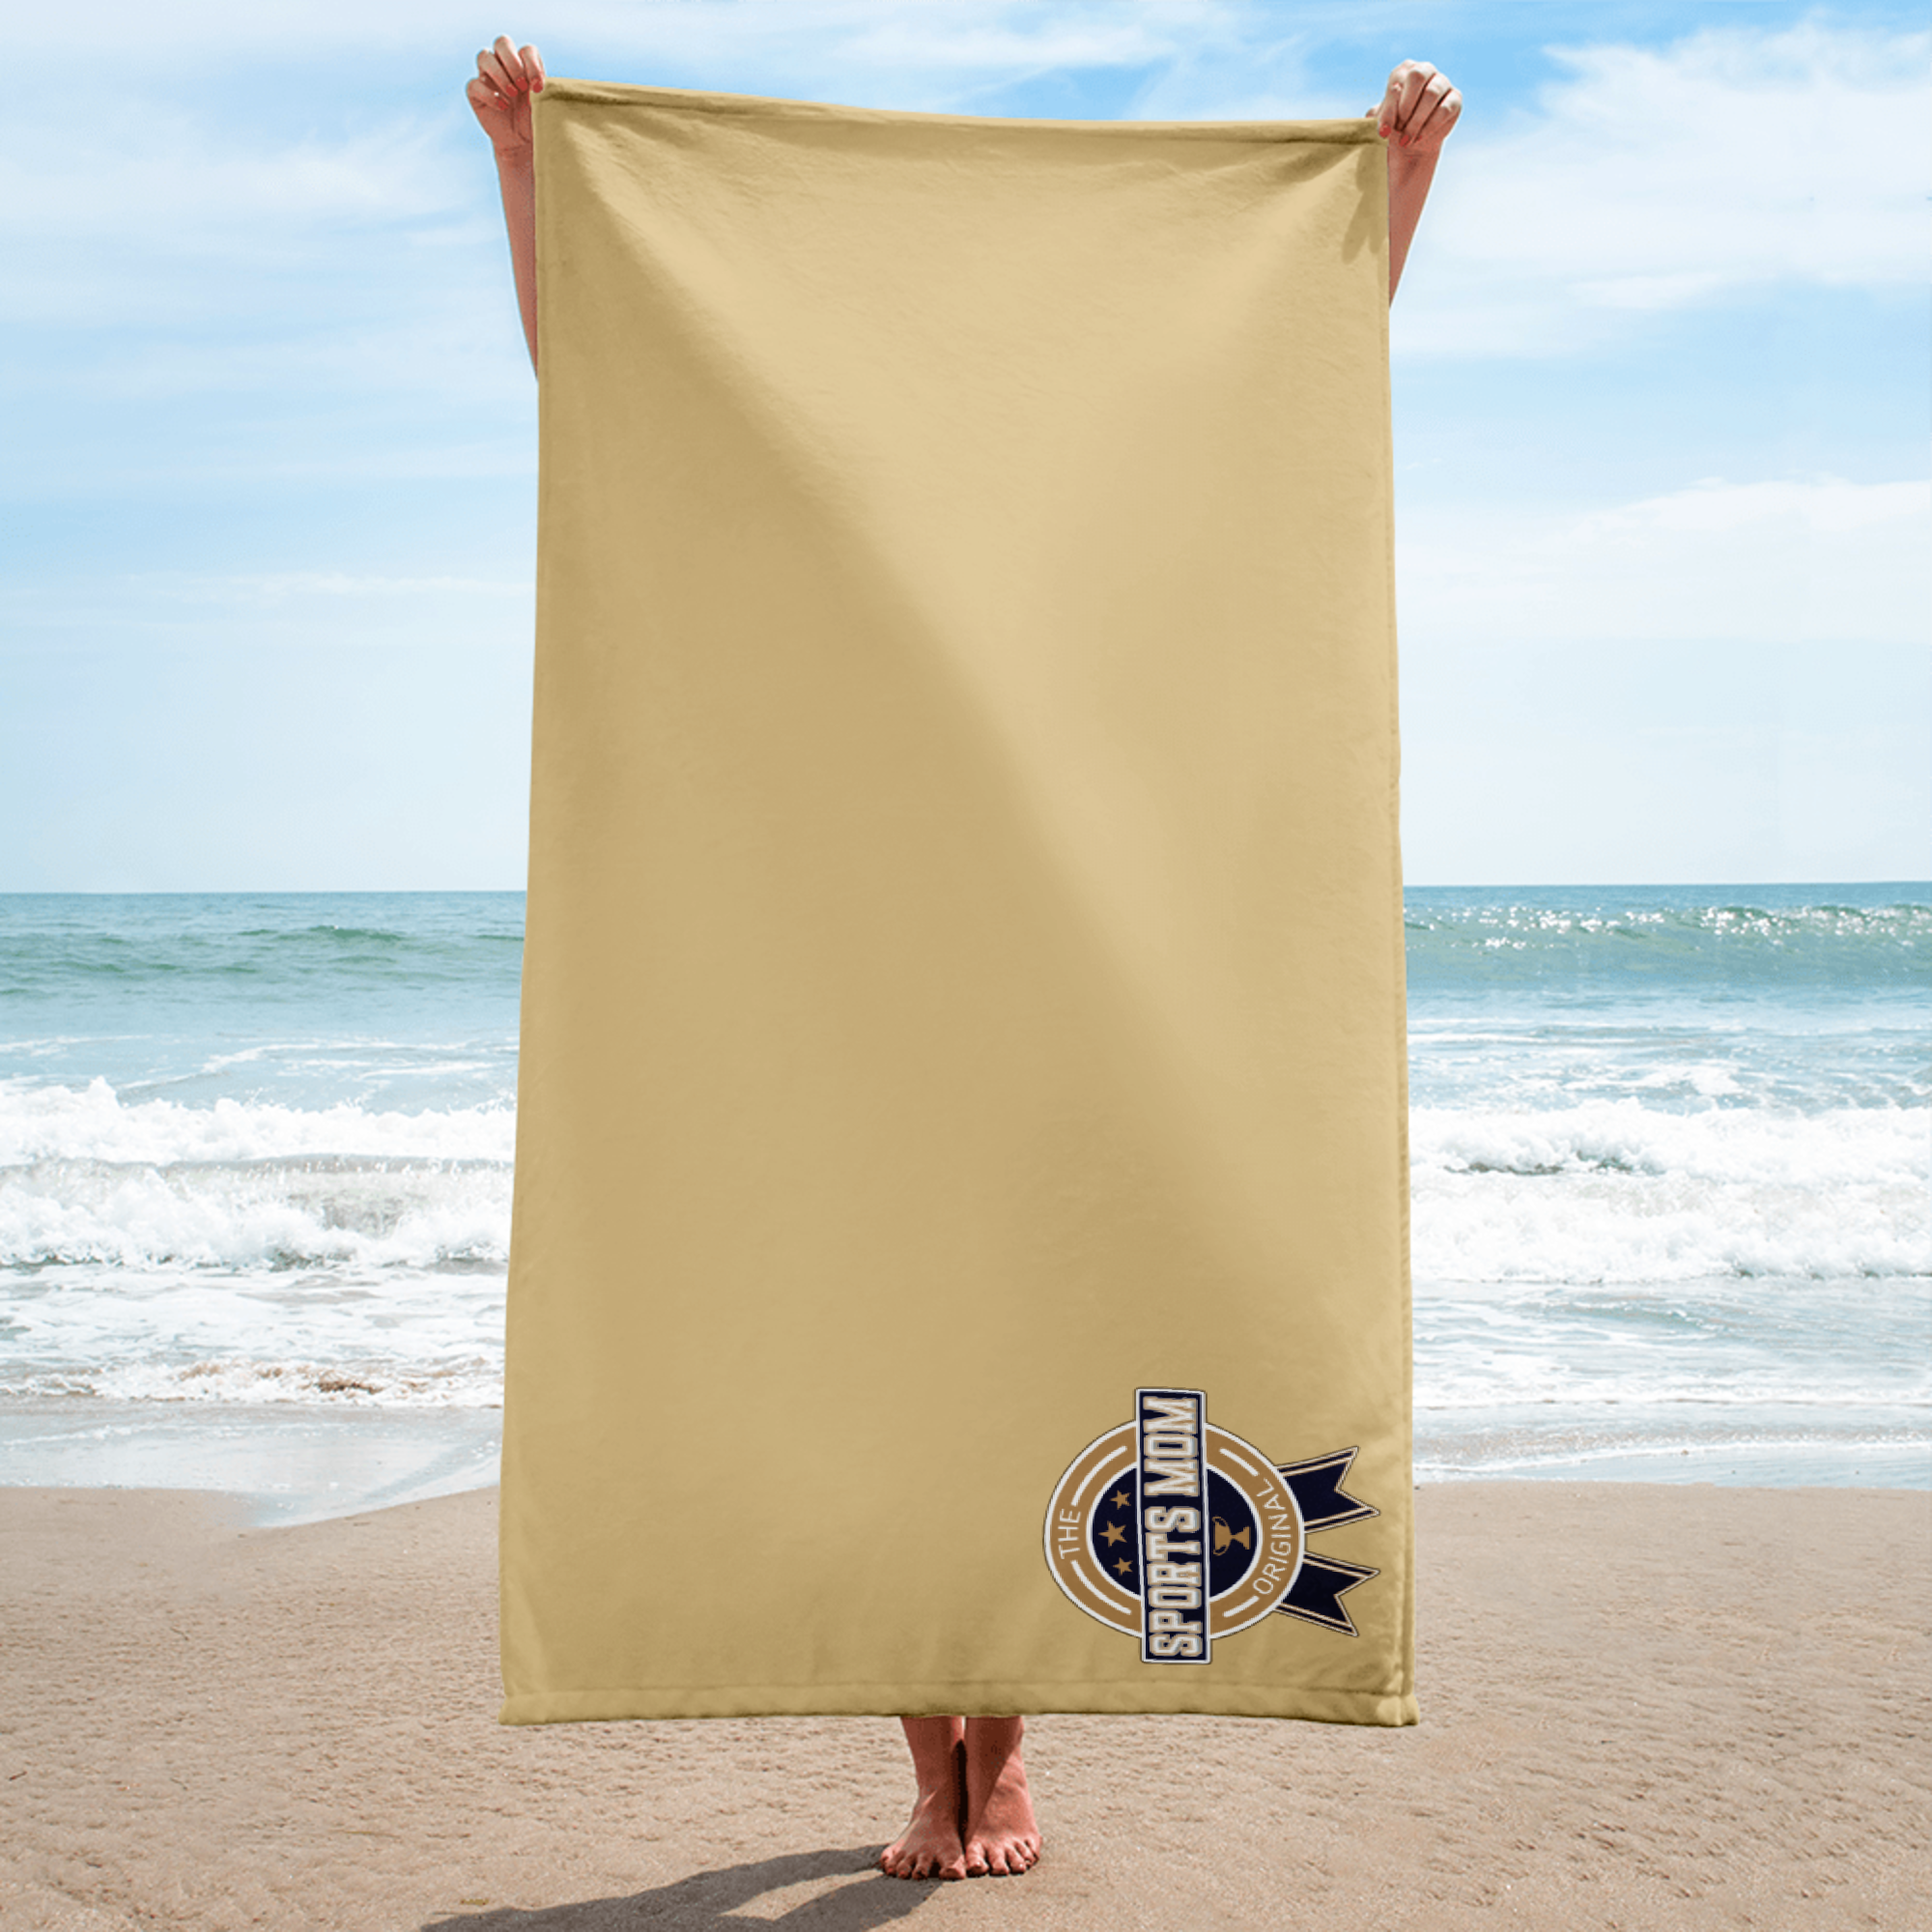 OSM - Away Game - MASSIVE Towel - New Orleans